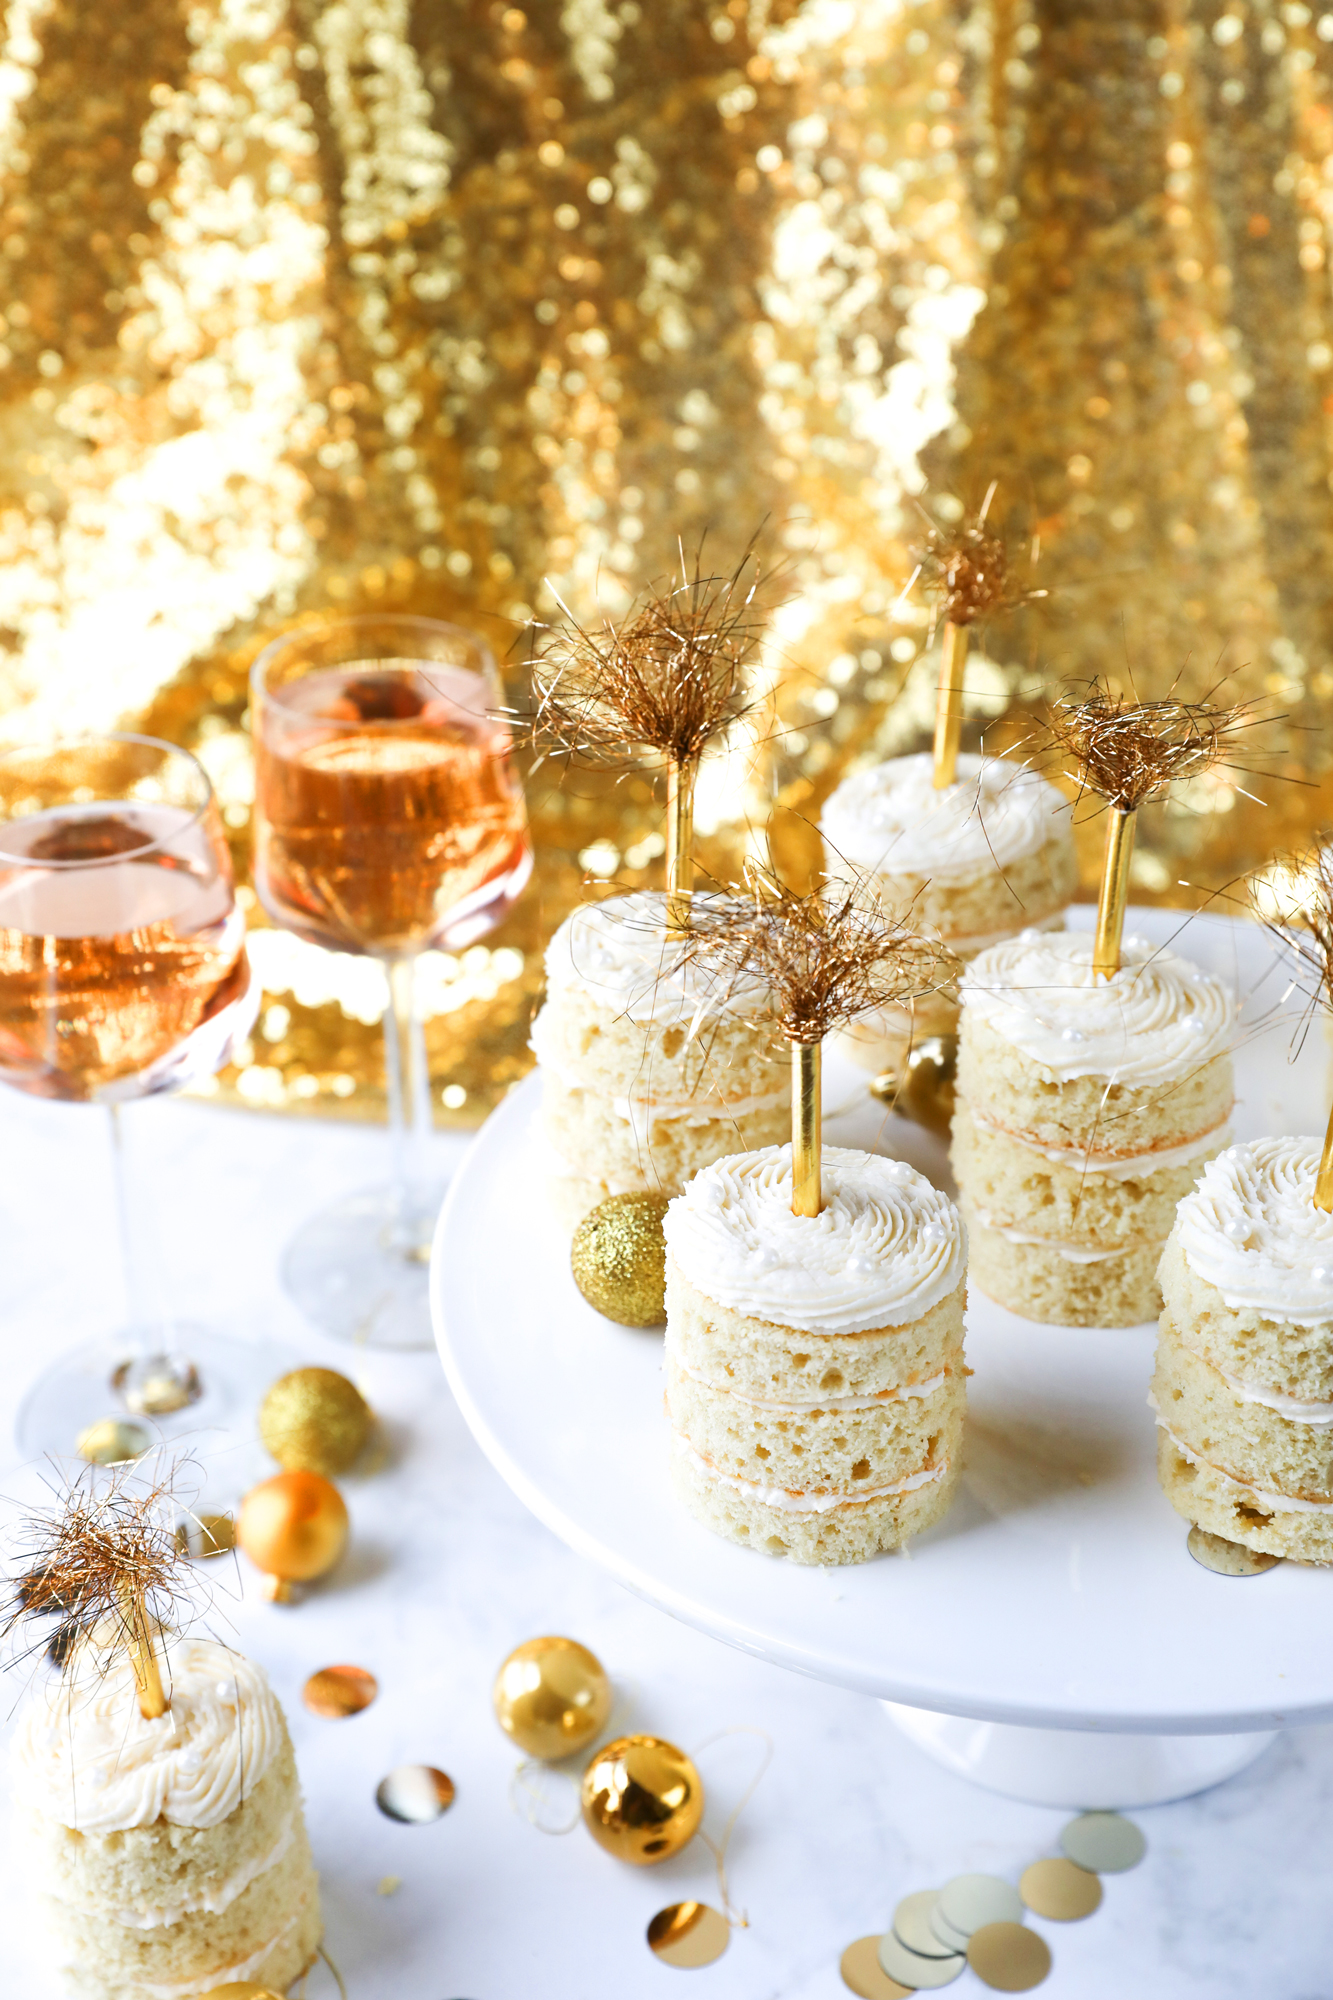 Celebrate the fresh New Year with delicious naked champagne cupcakes! Get the recipe here!